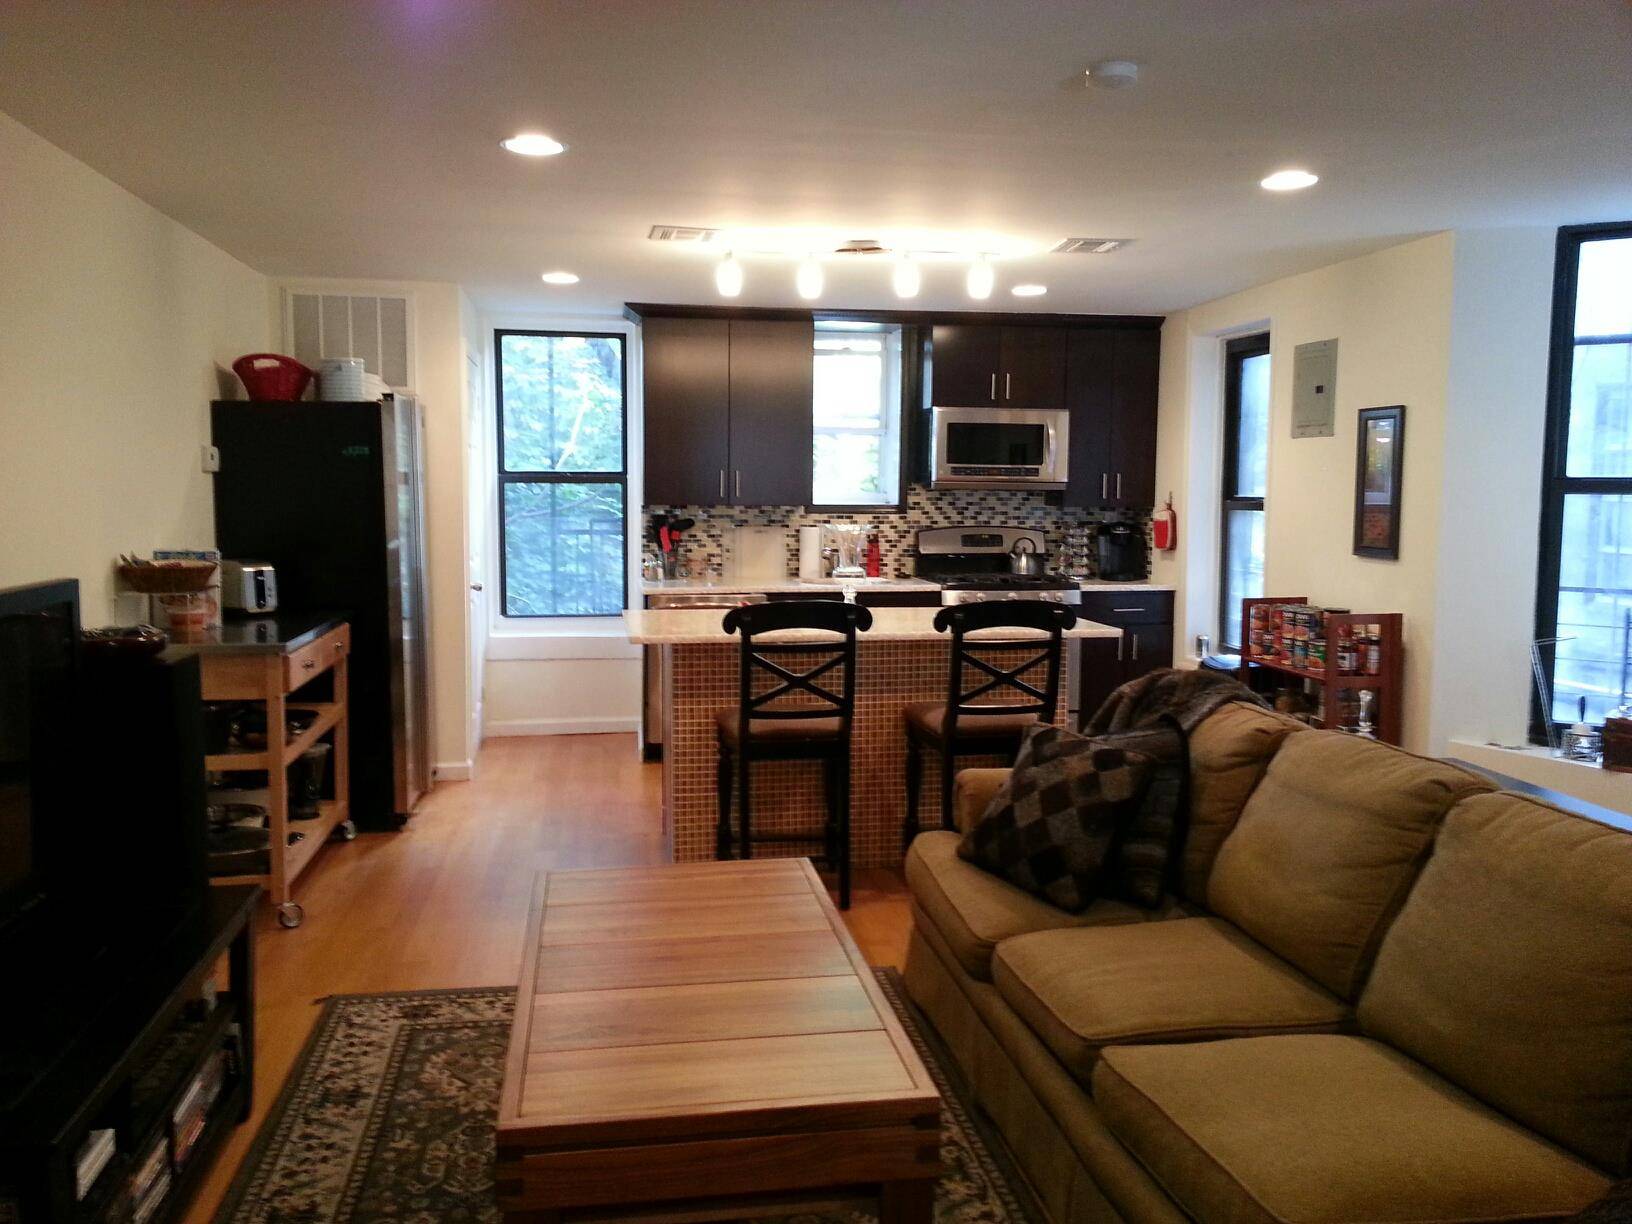 Spacious 2 Bedroom For Rent in Greenpoint near McCarren Park